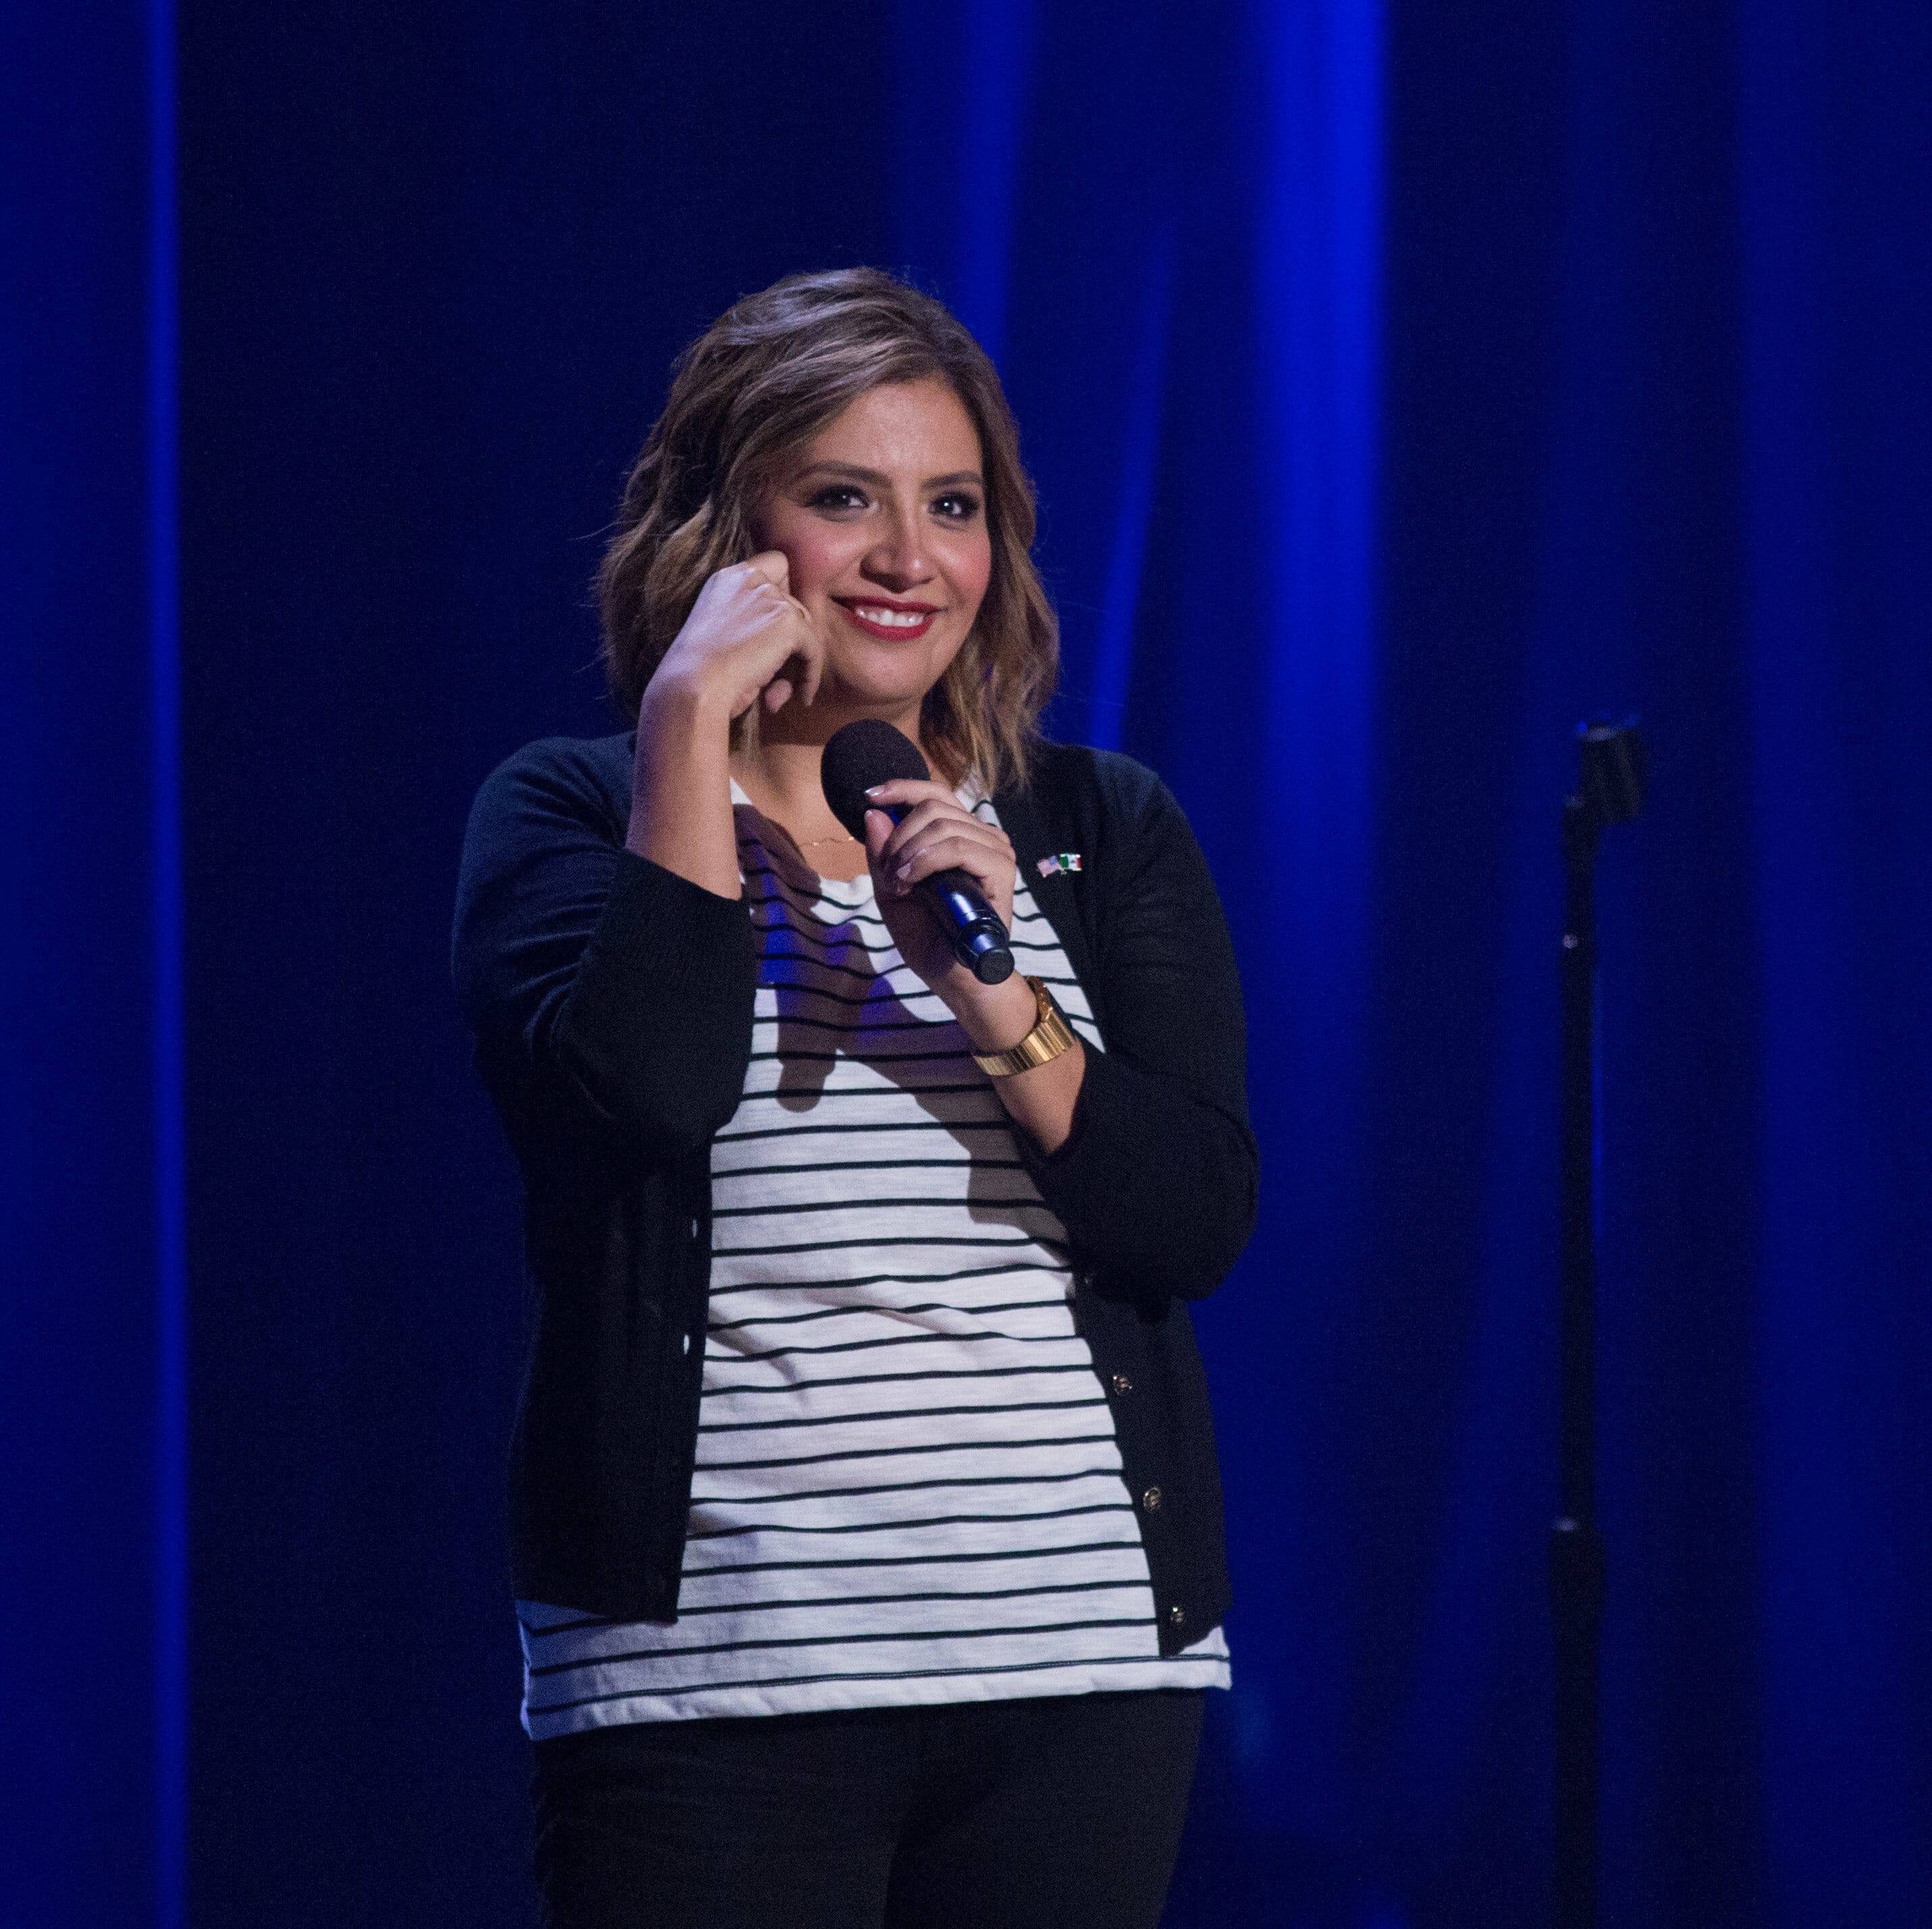 Cristela Alonzo Doesn't Want to Get Complacent